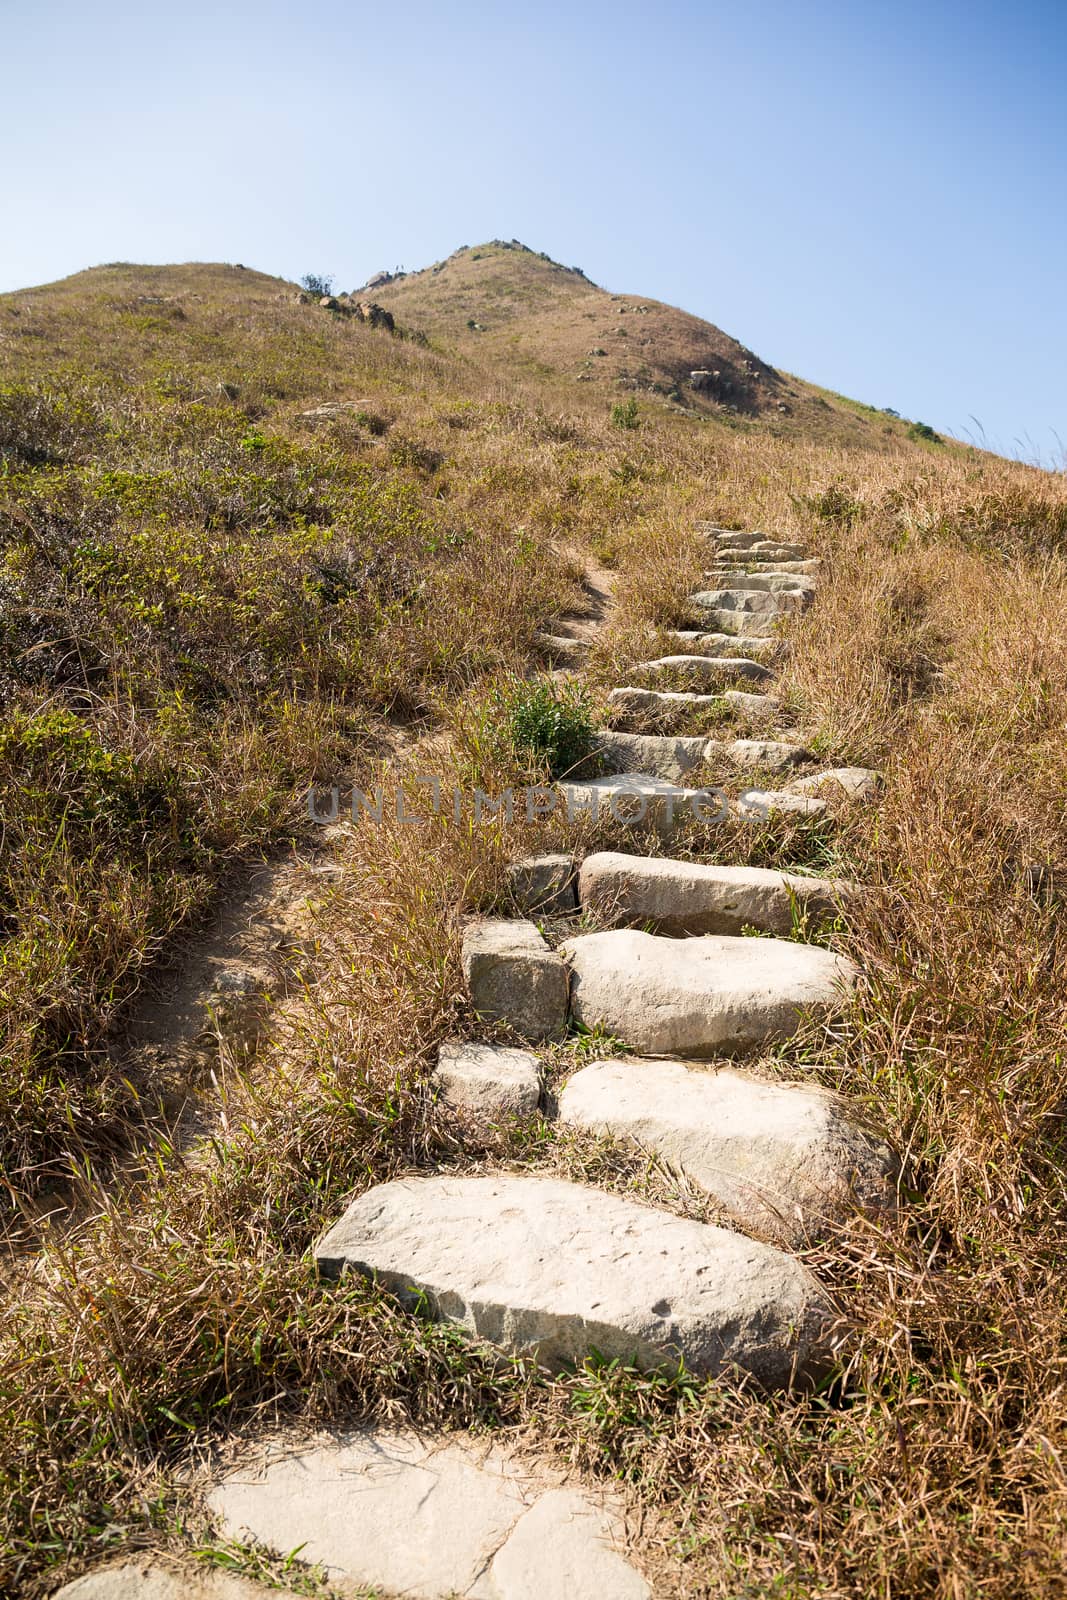 Pathway to the top of the mountain